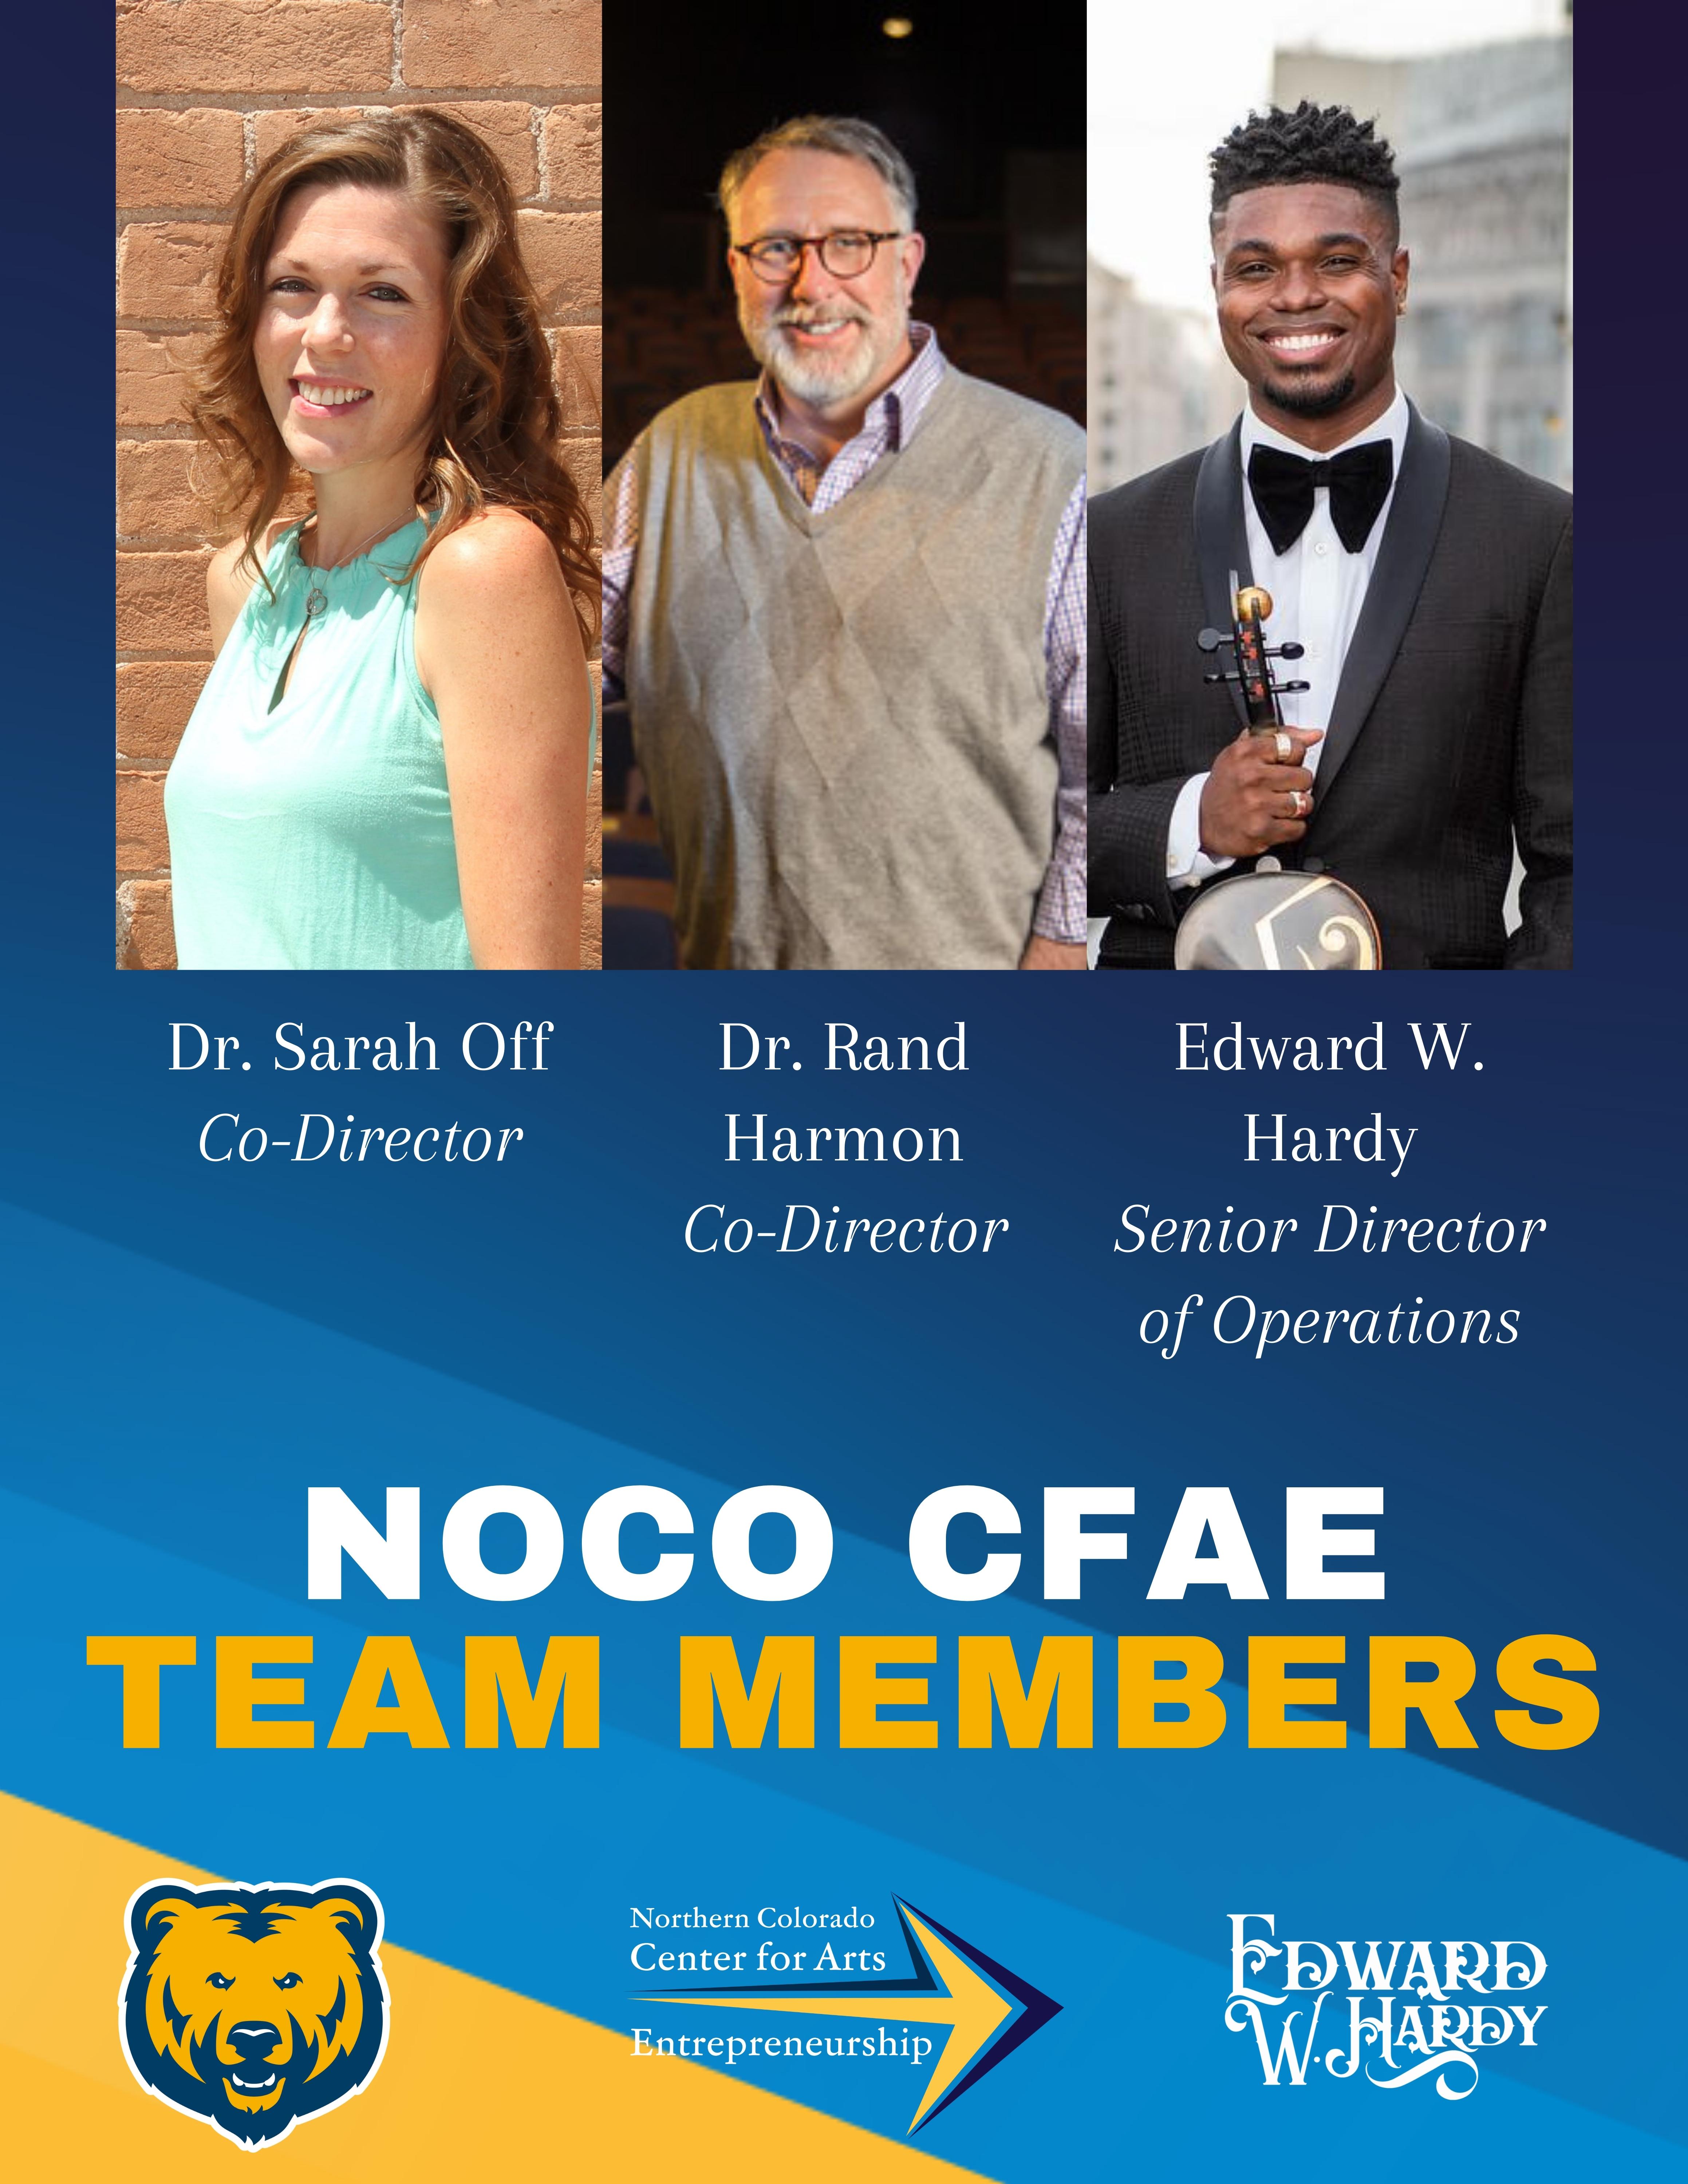 Founders of the Northern Colorado Center for Arts Entrepreneurship | (L-R) Co-directors Dr. Sarah Off, Dr. Rand Harmon and senior director of operations Edward W. Hardy